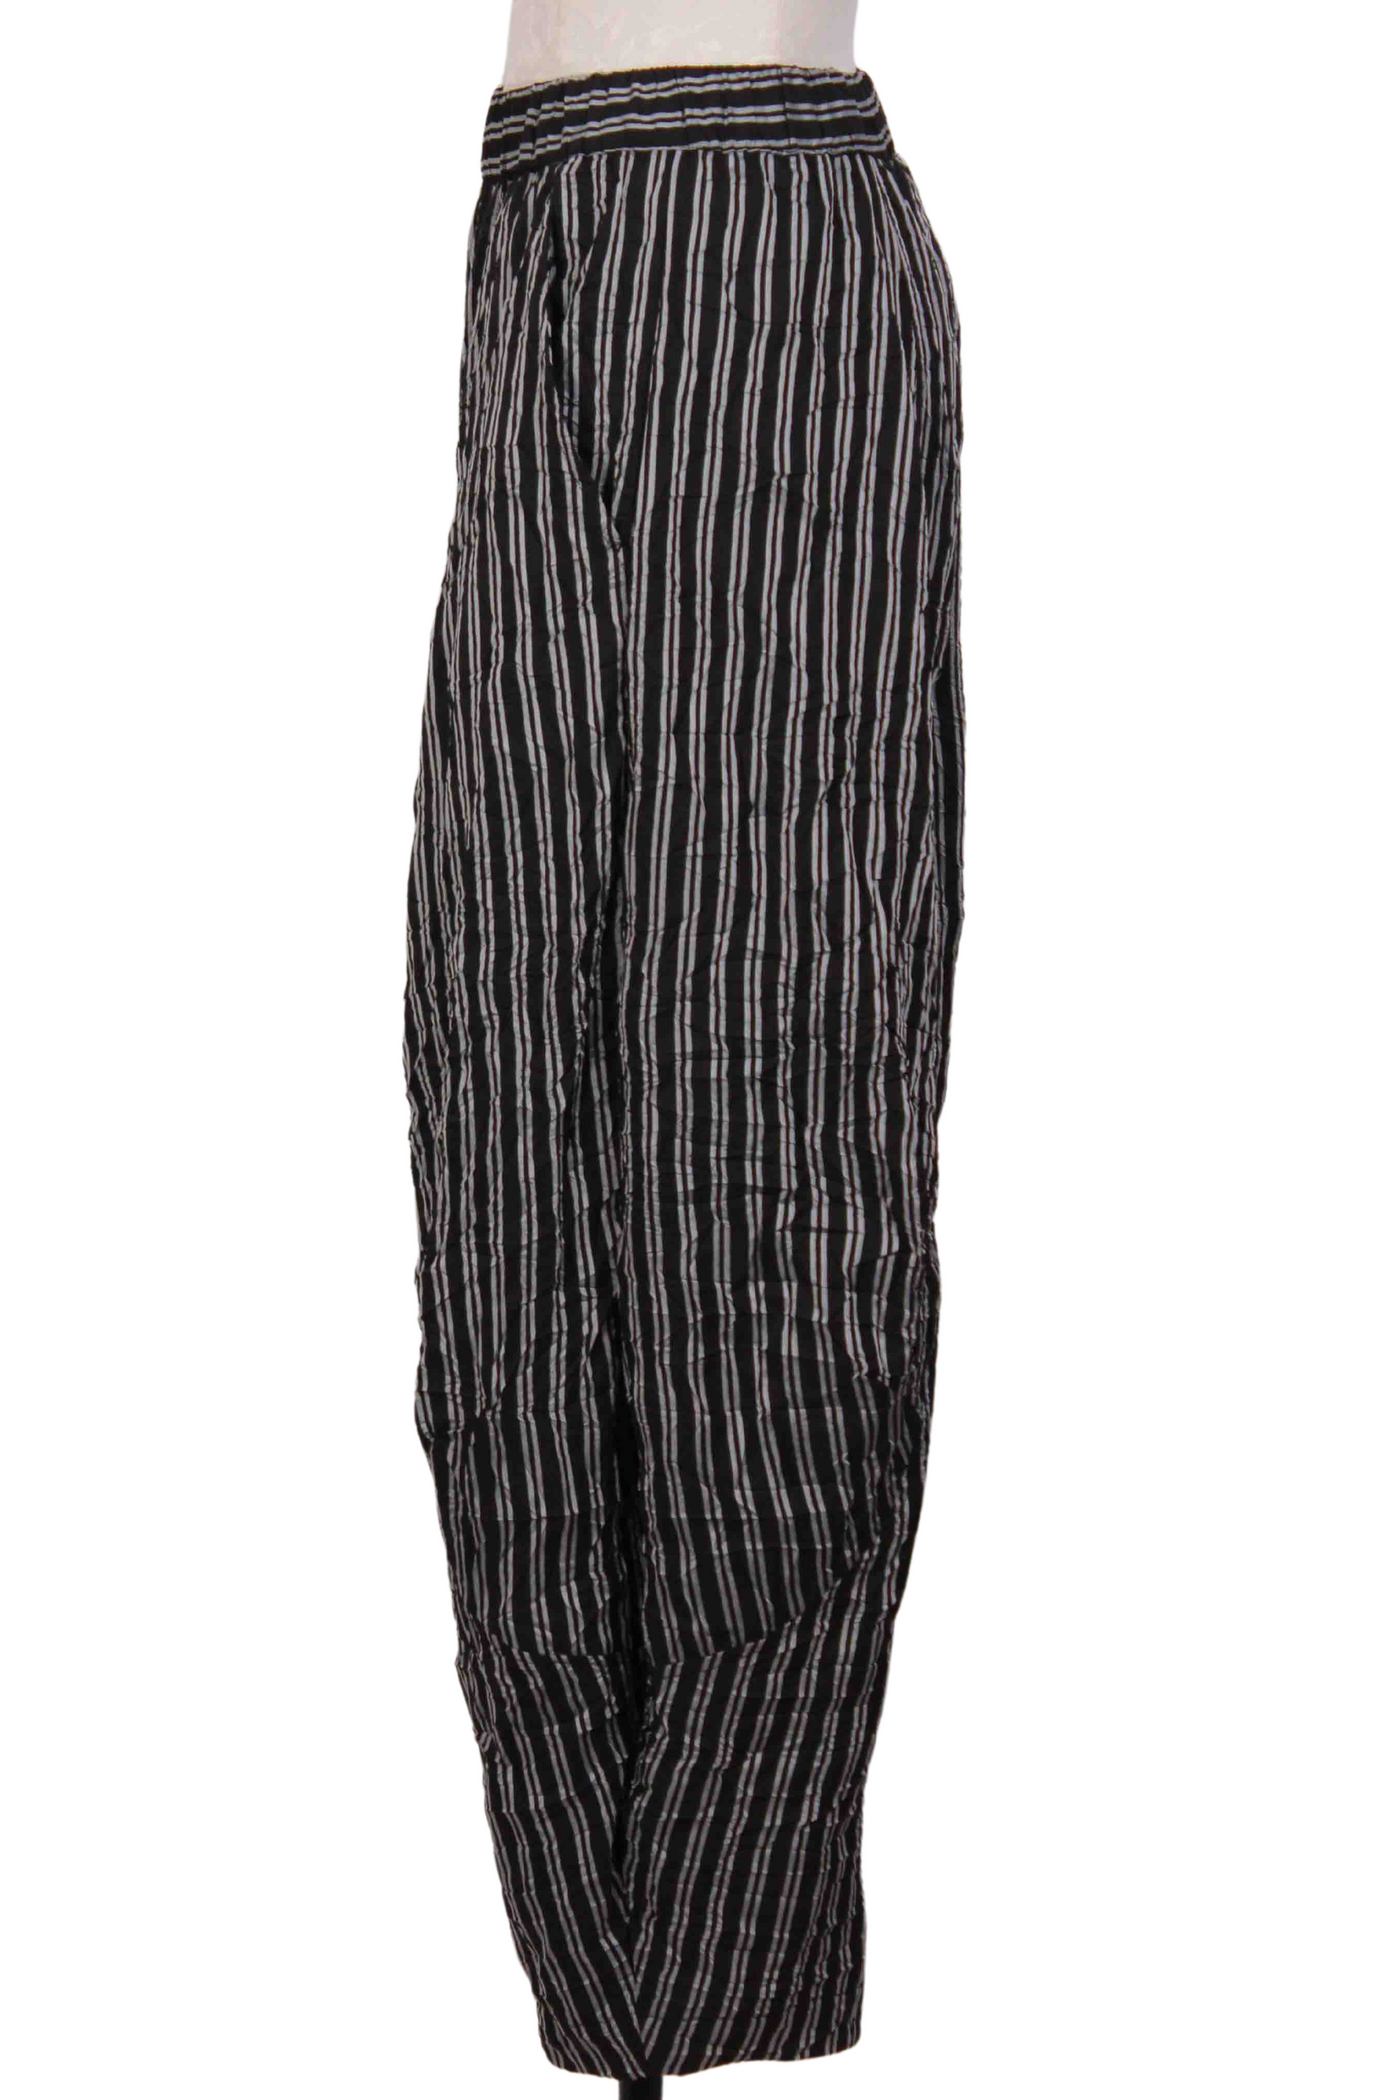 side view of Black and White Pinstriped Parachute Pant by Alembika